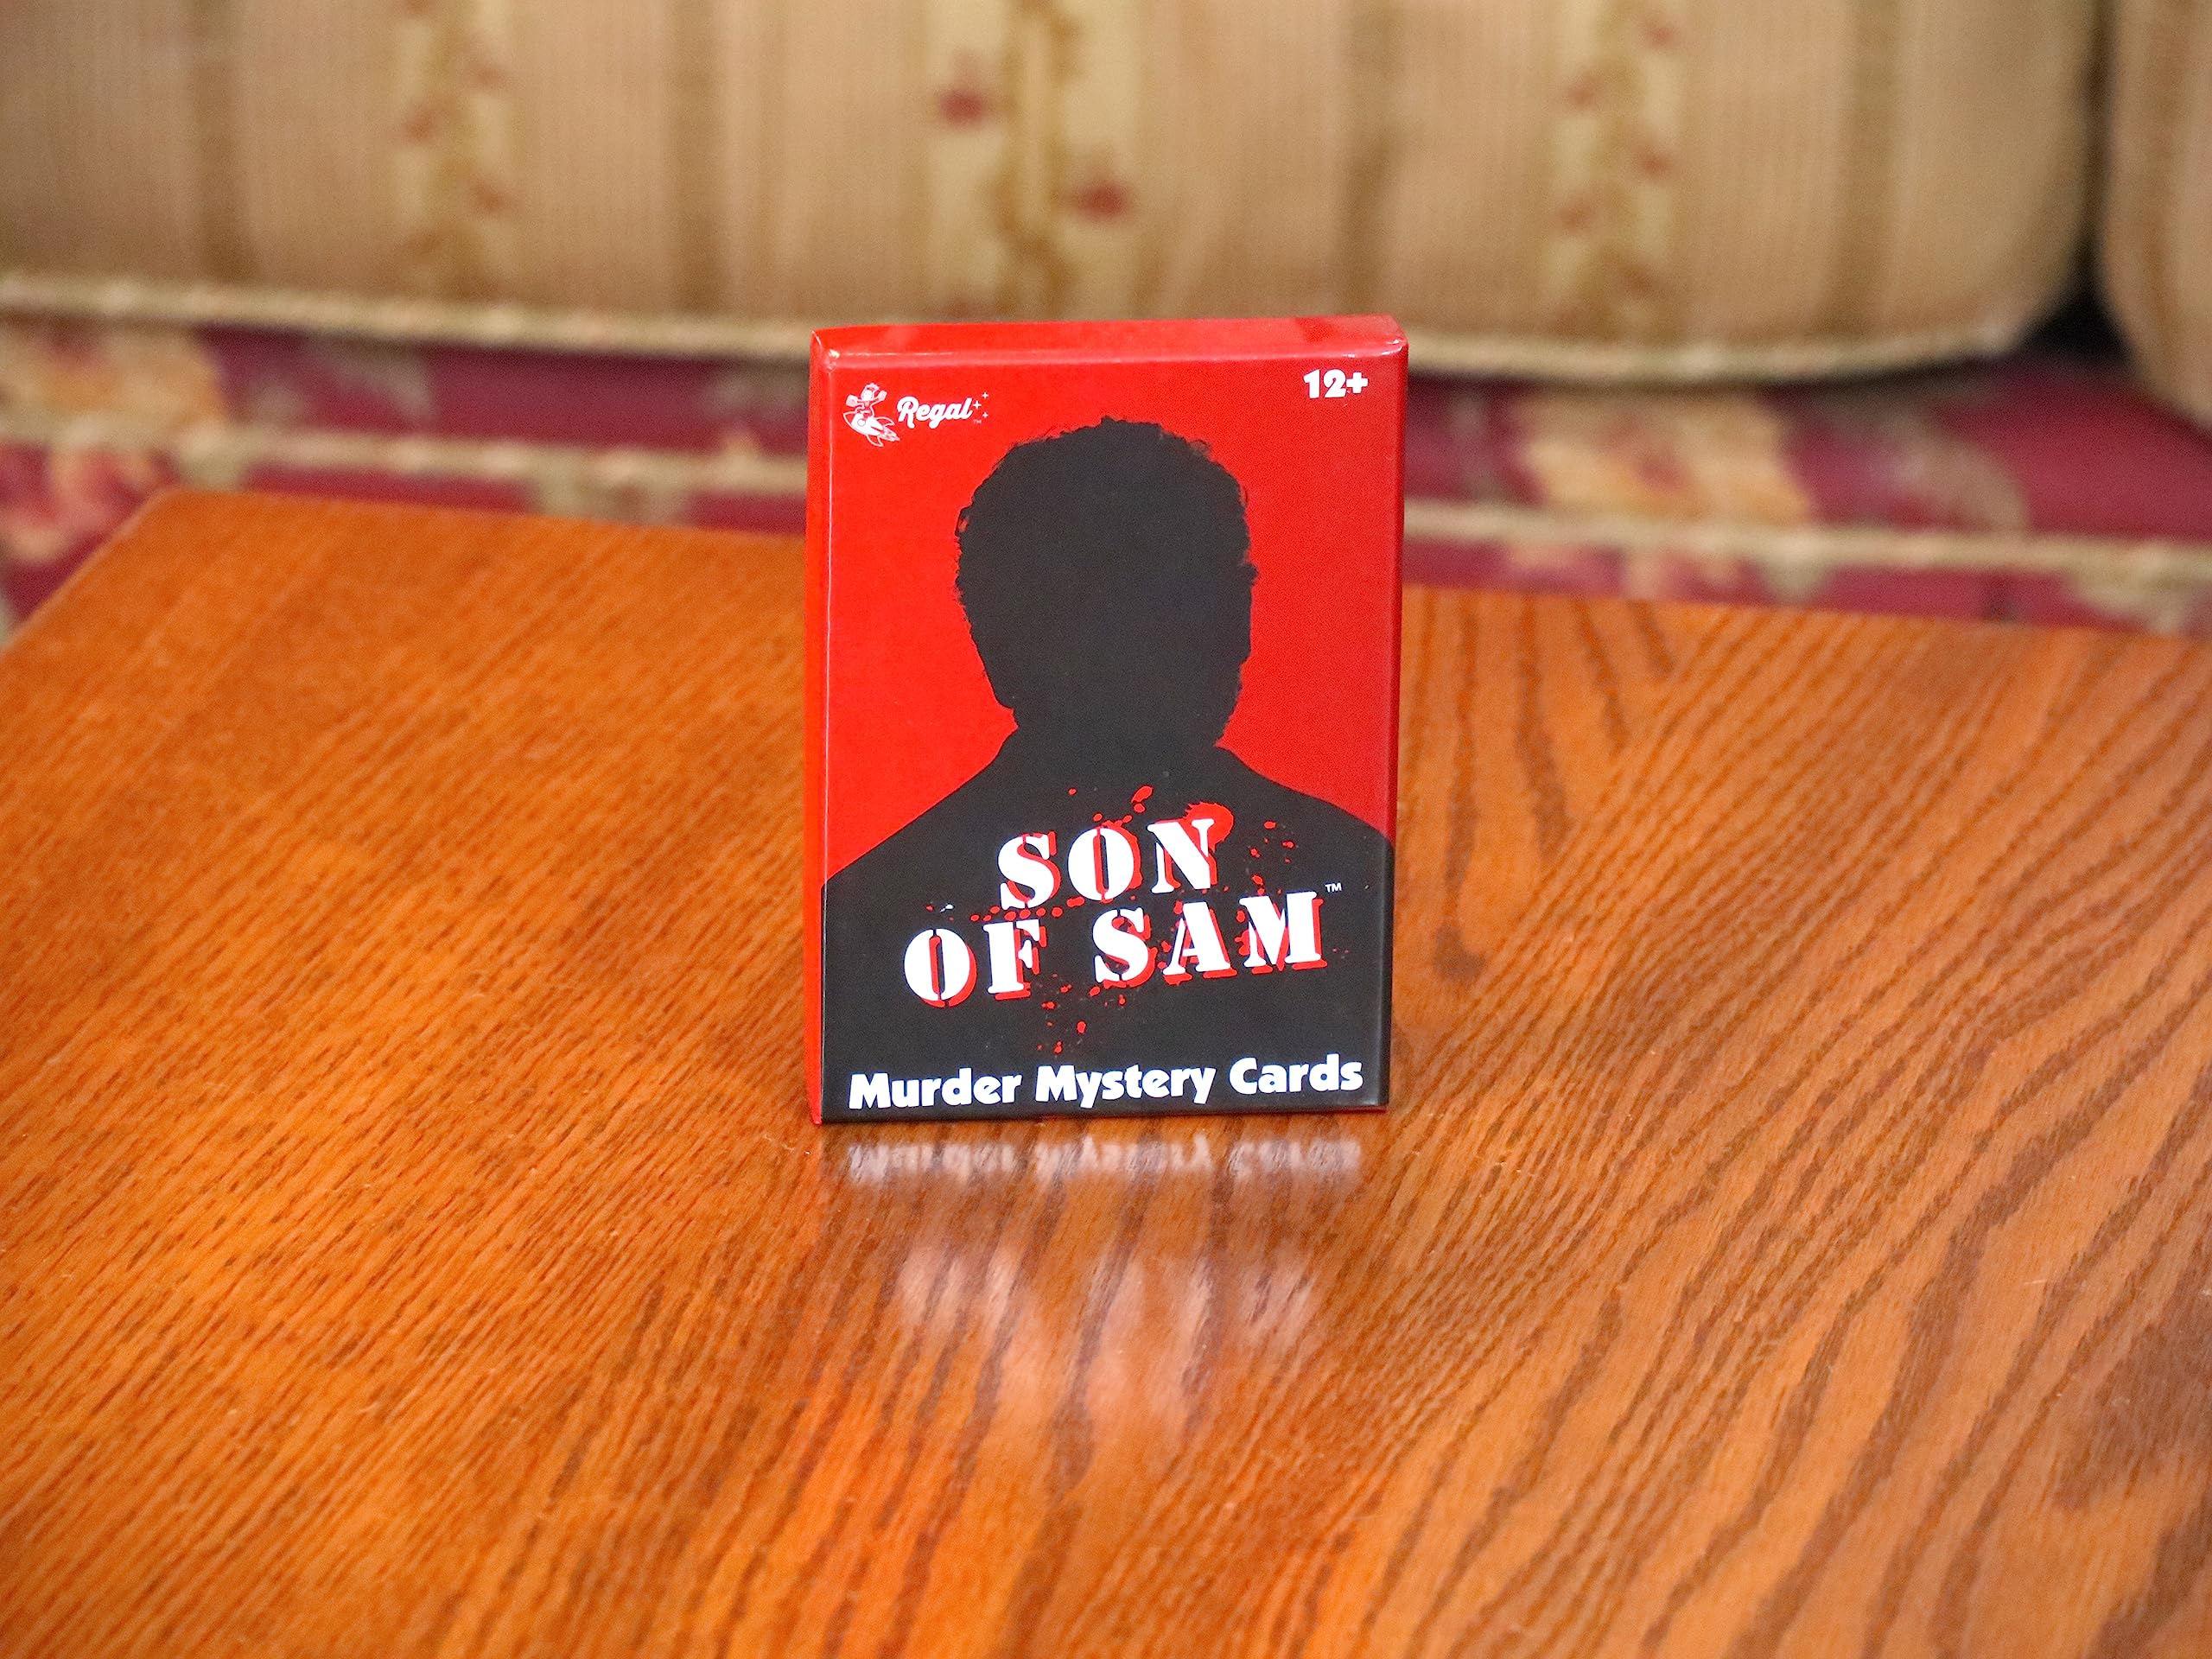 Regal Games - Son of Sam - Murder Mystery Card Game - for Holidays, Game Nights, and Parties - 5”x 2” Card Size - 54 Count - Up to 26 Players, Ages 12+